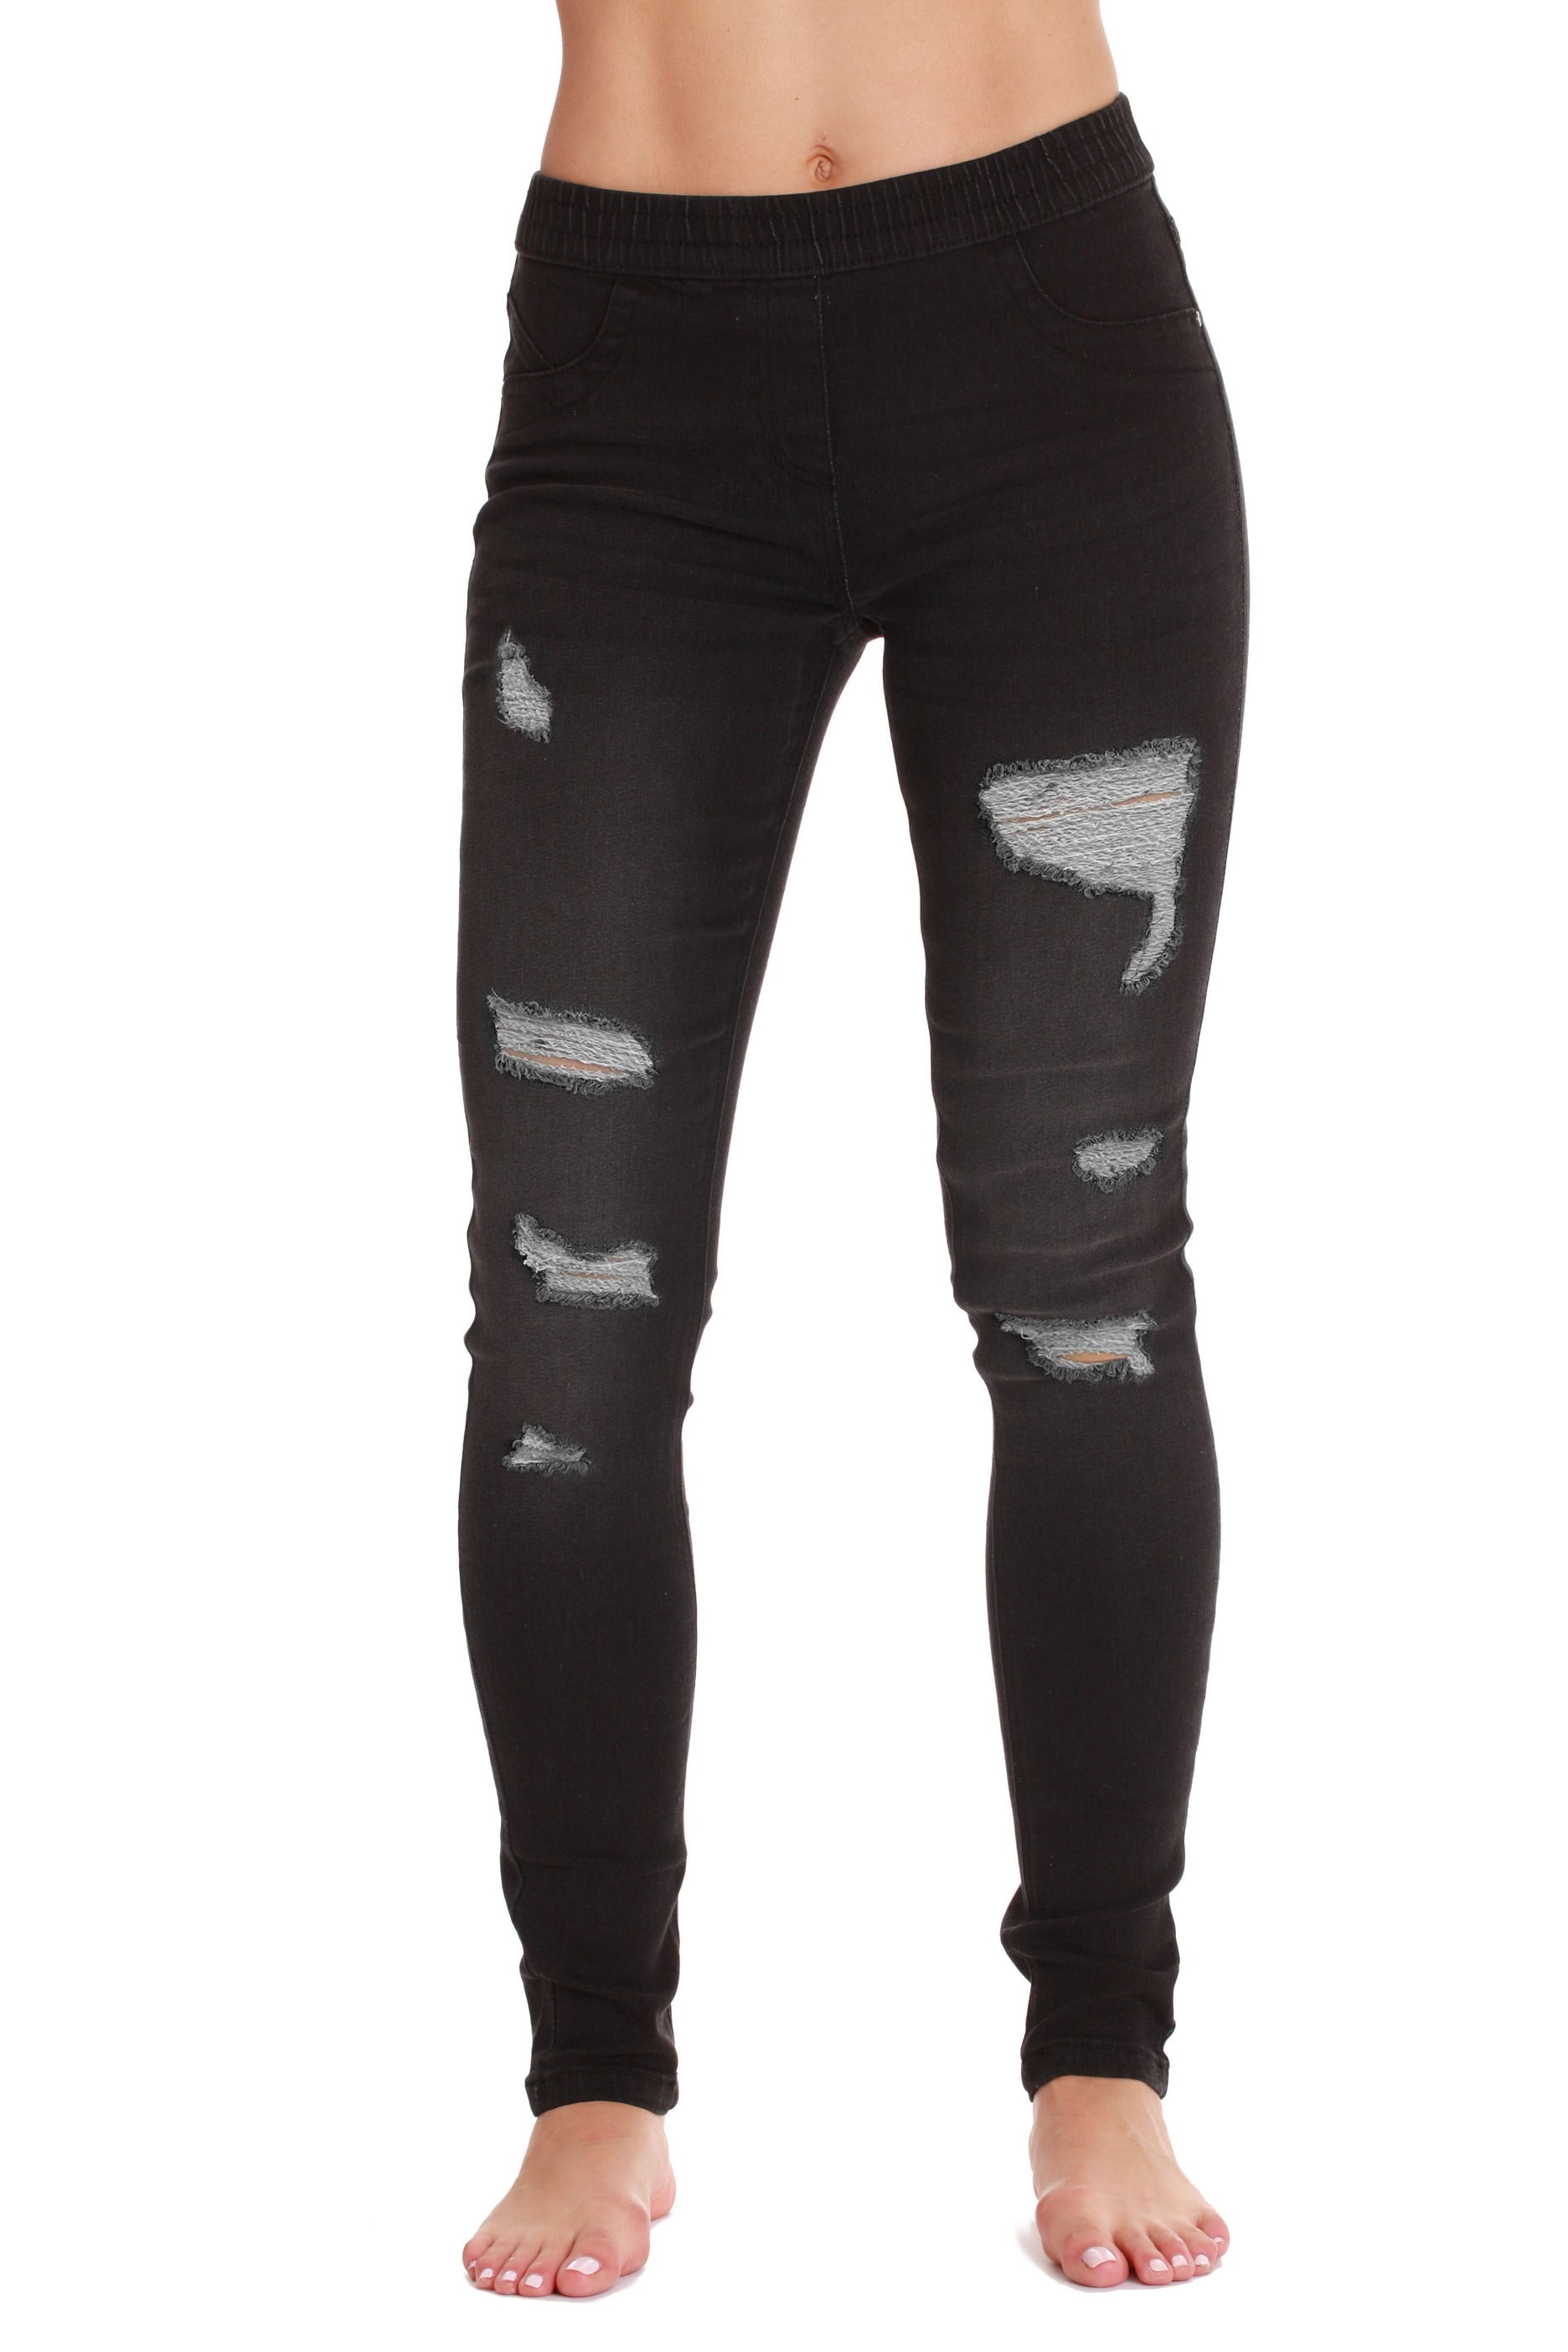 Just Love Denim Wash Ripped Jeggings for Women (Black Ripped Denim, Small)  